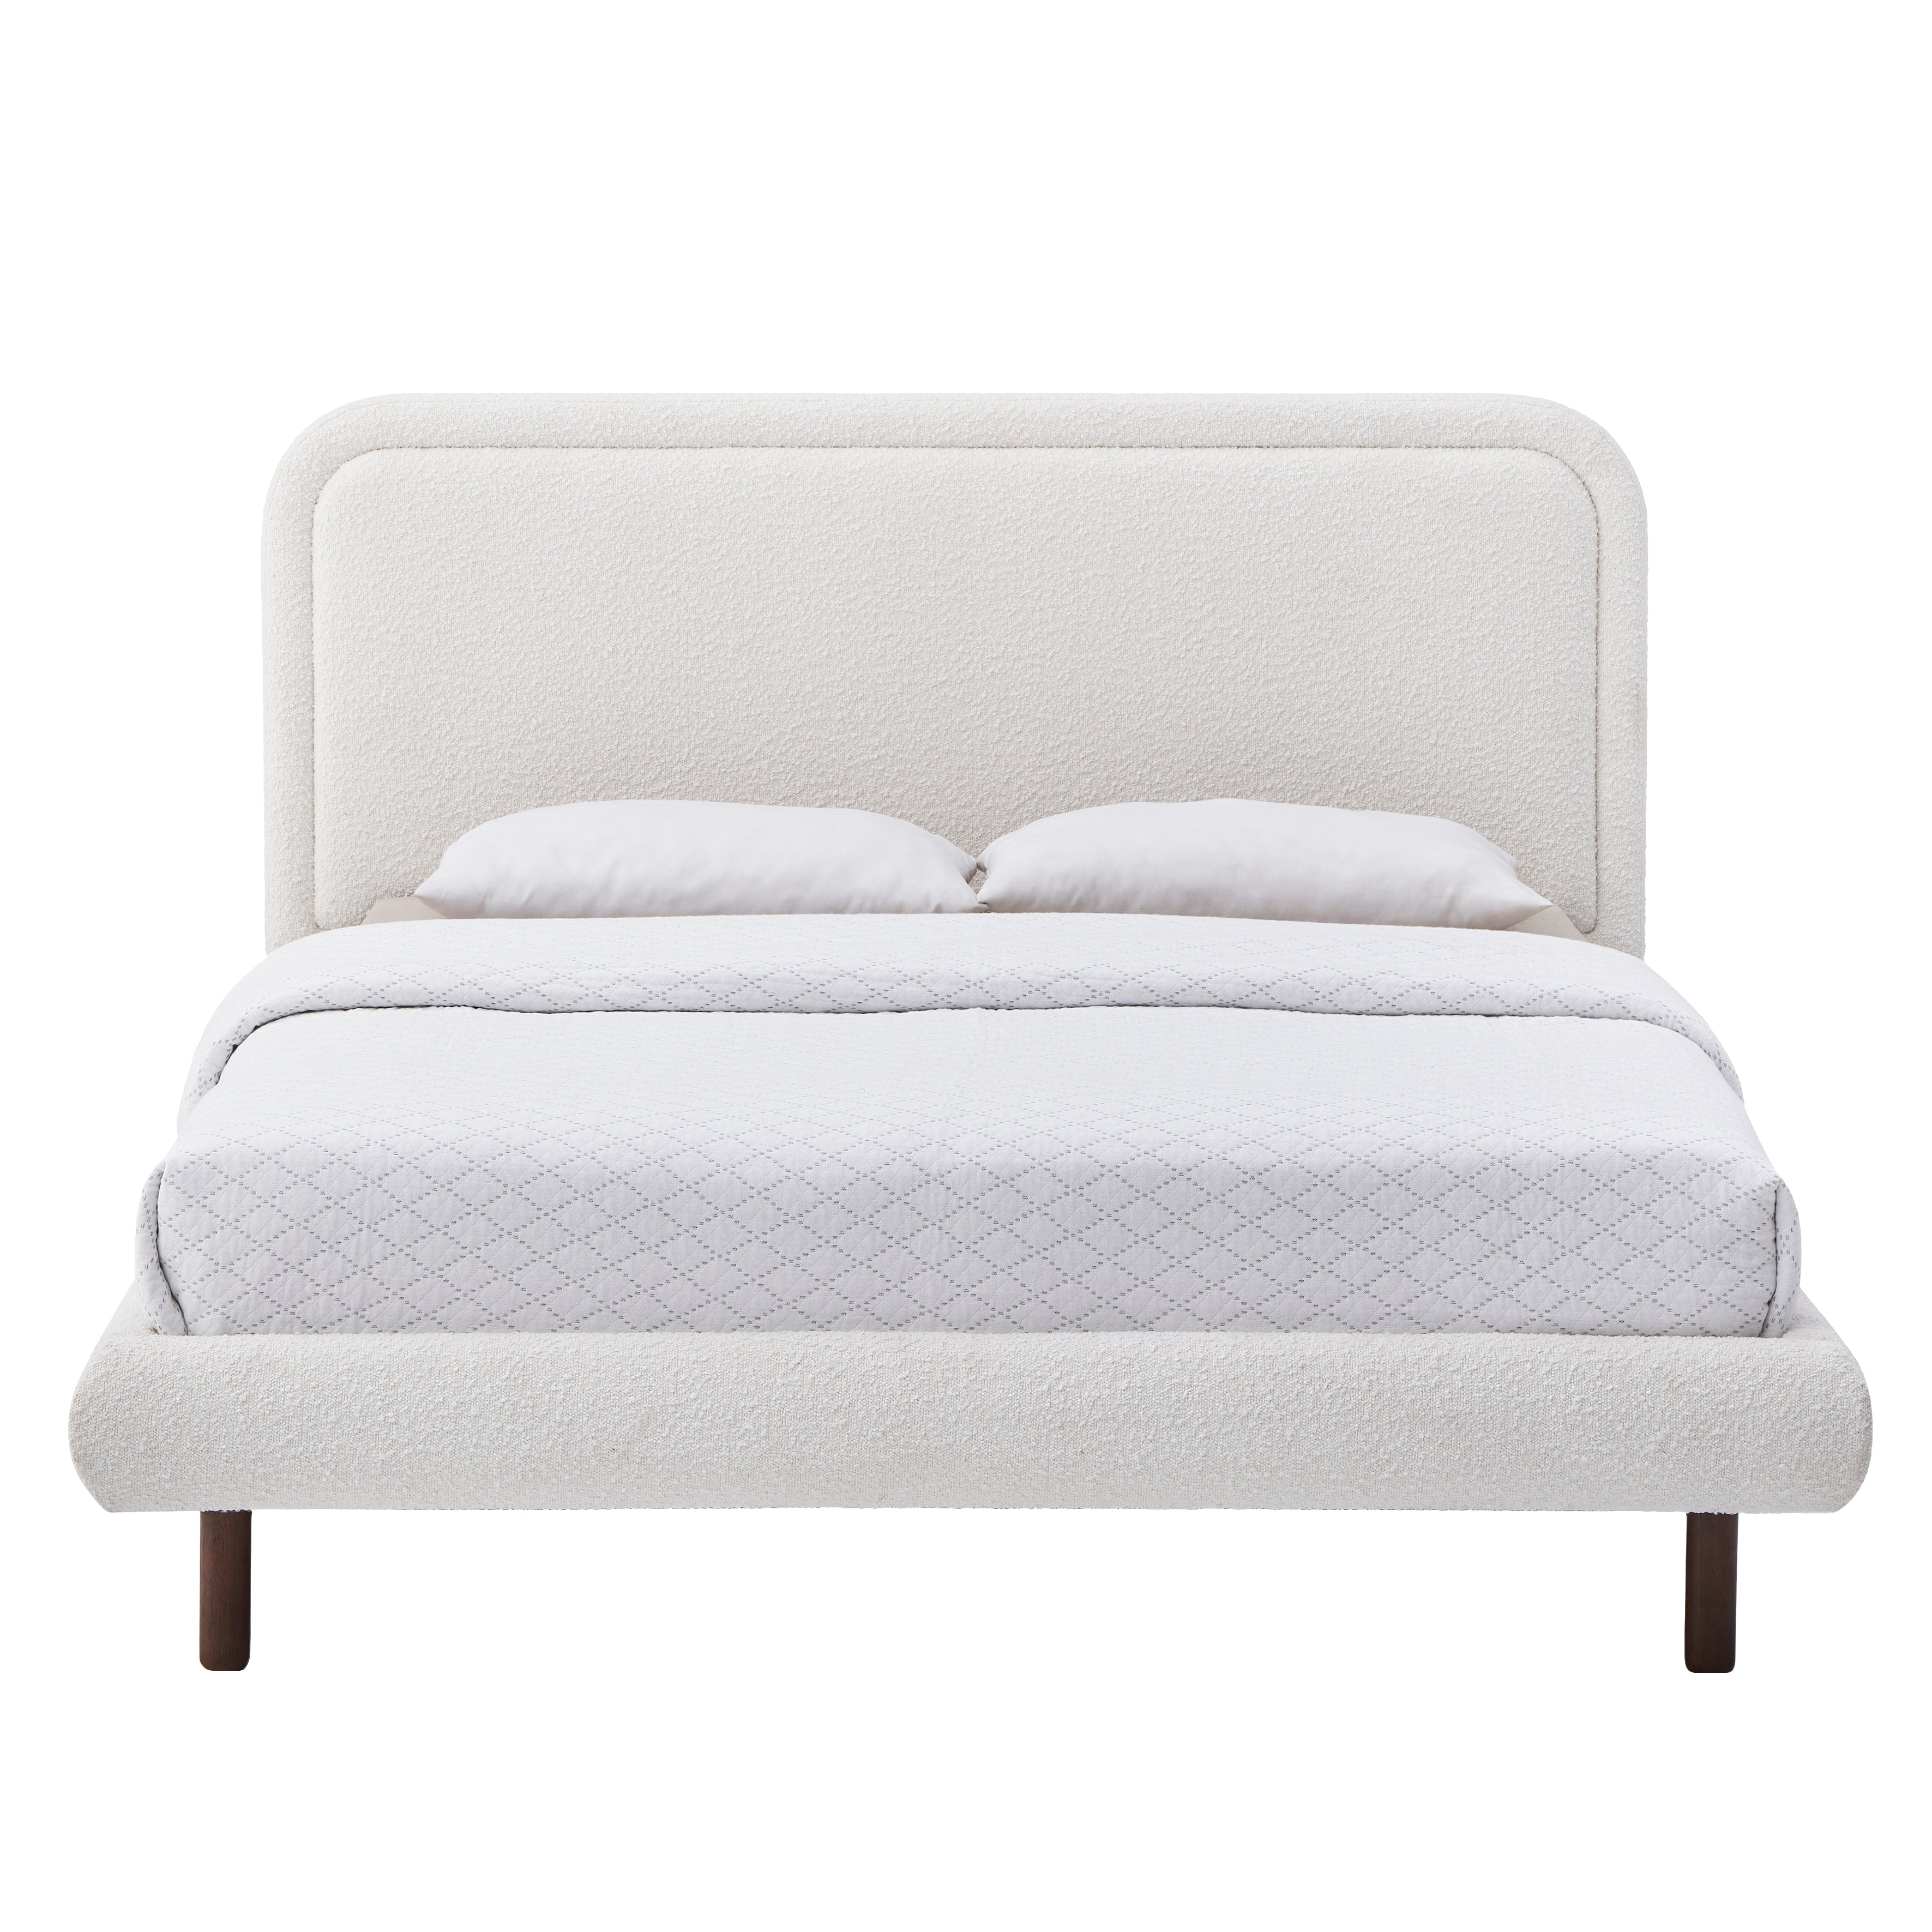 Beverly Upholstered Platform Queen Bed, White Boucle Fabric